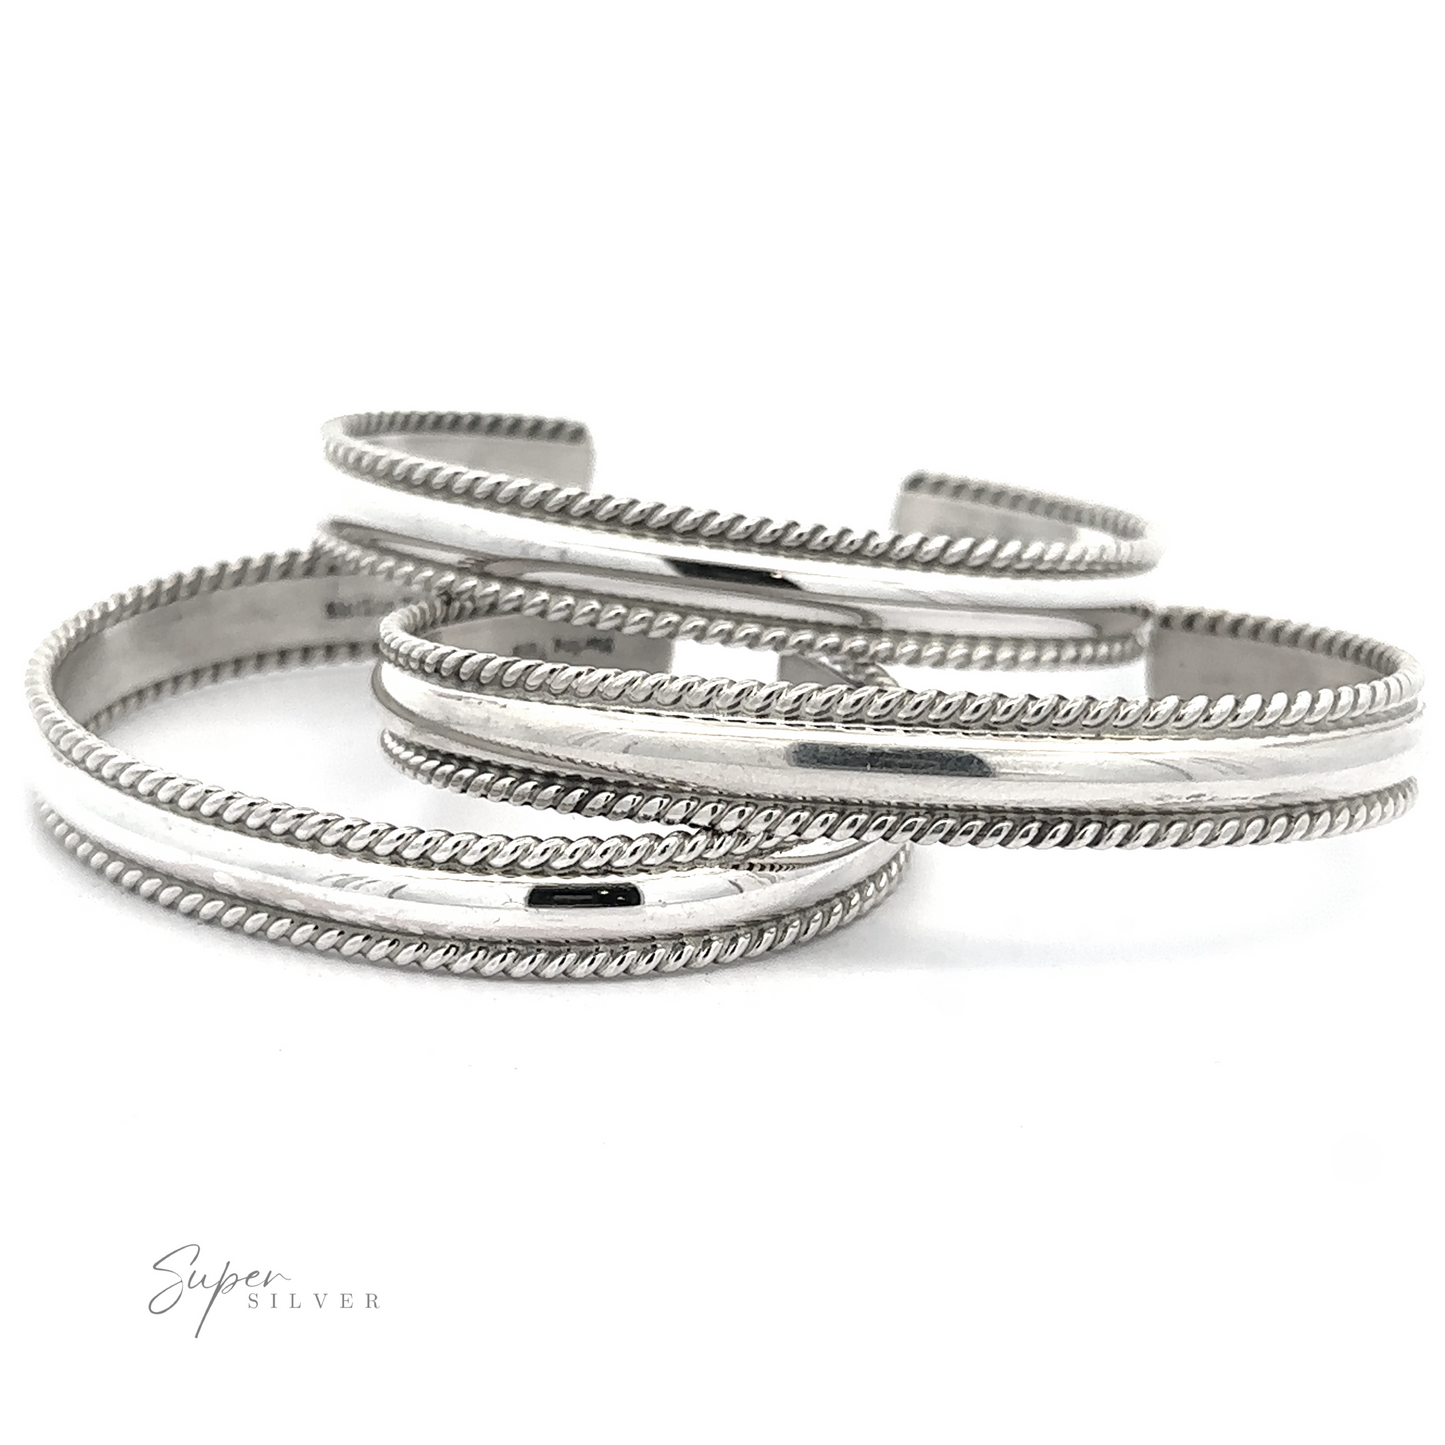 Three polished Native American Handmade Silver Rope Cuffs with rope-like edges, overlapping each other on a white background. The logo "Super Silver" is in the bottom left corner, showcasing these stunning statement pieces.